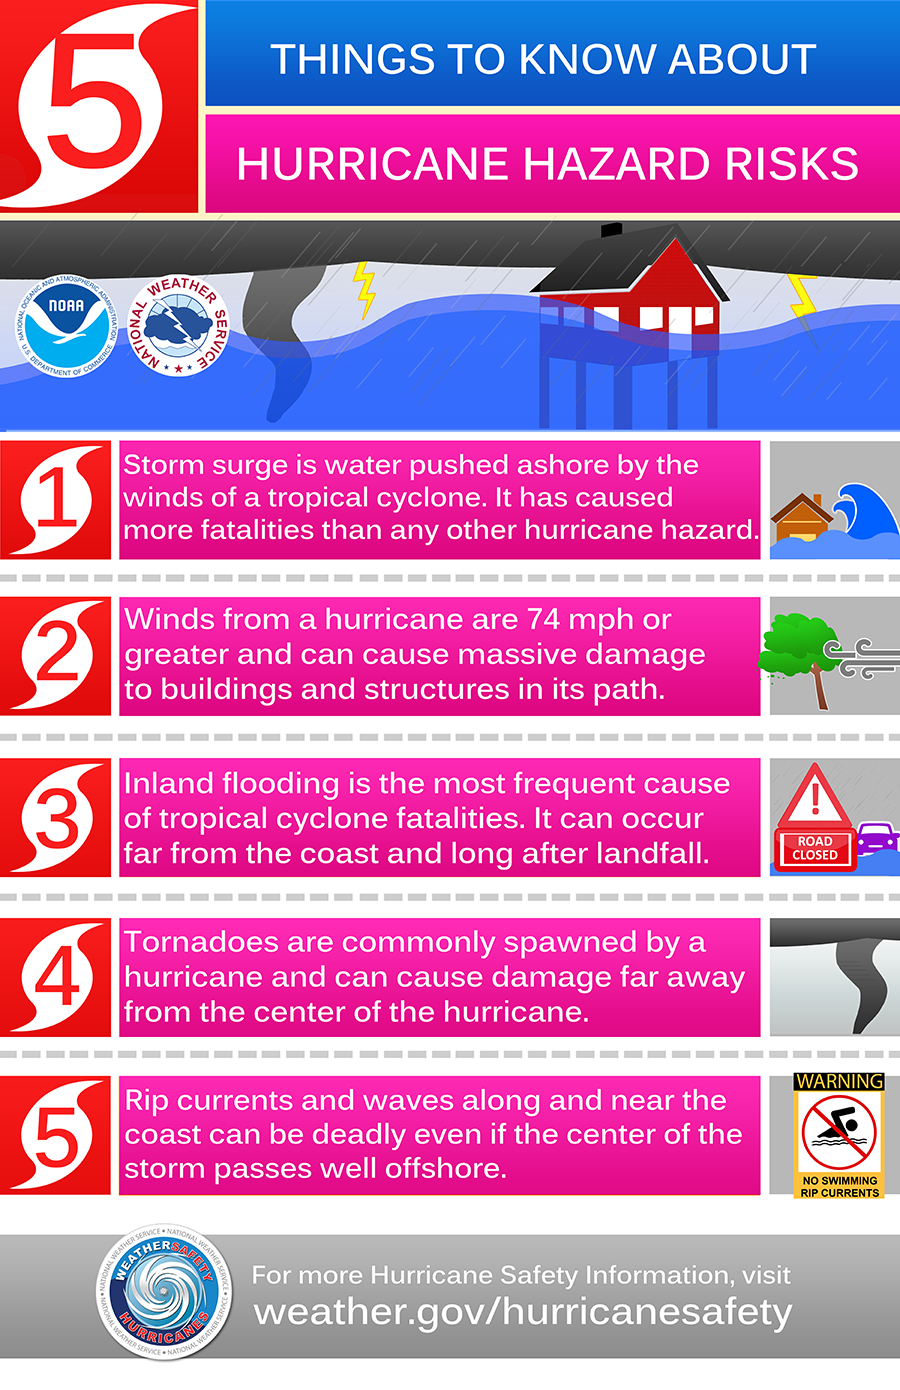 Things to know about hurricane hazard risks